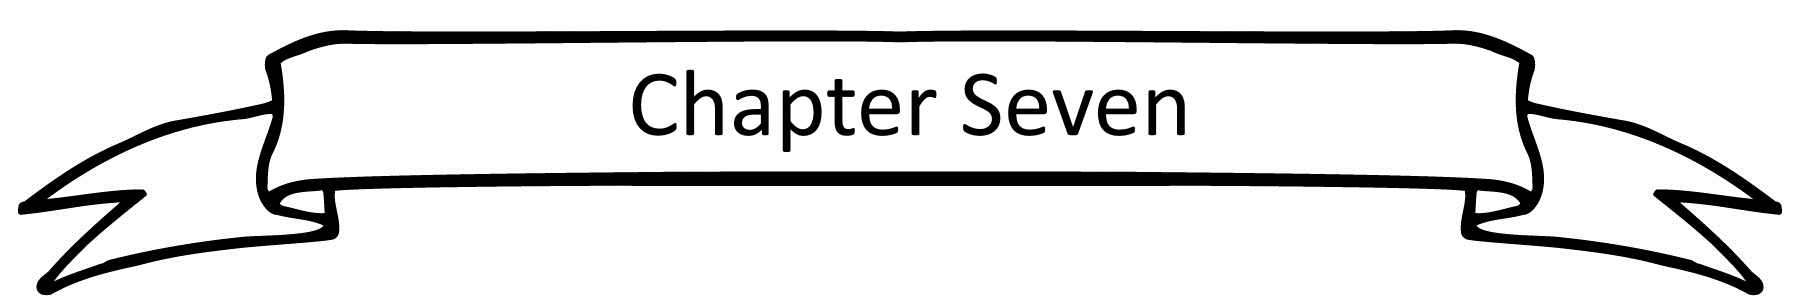 chapter seven heading